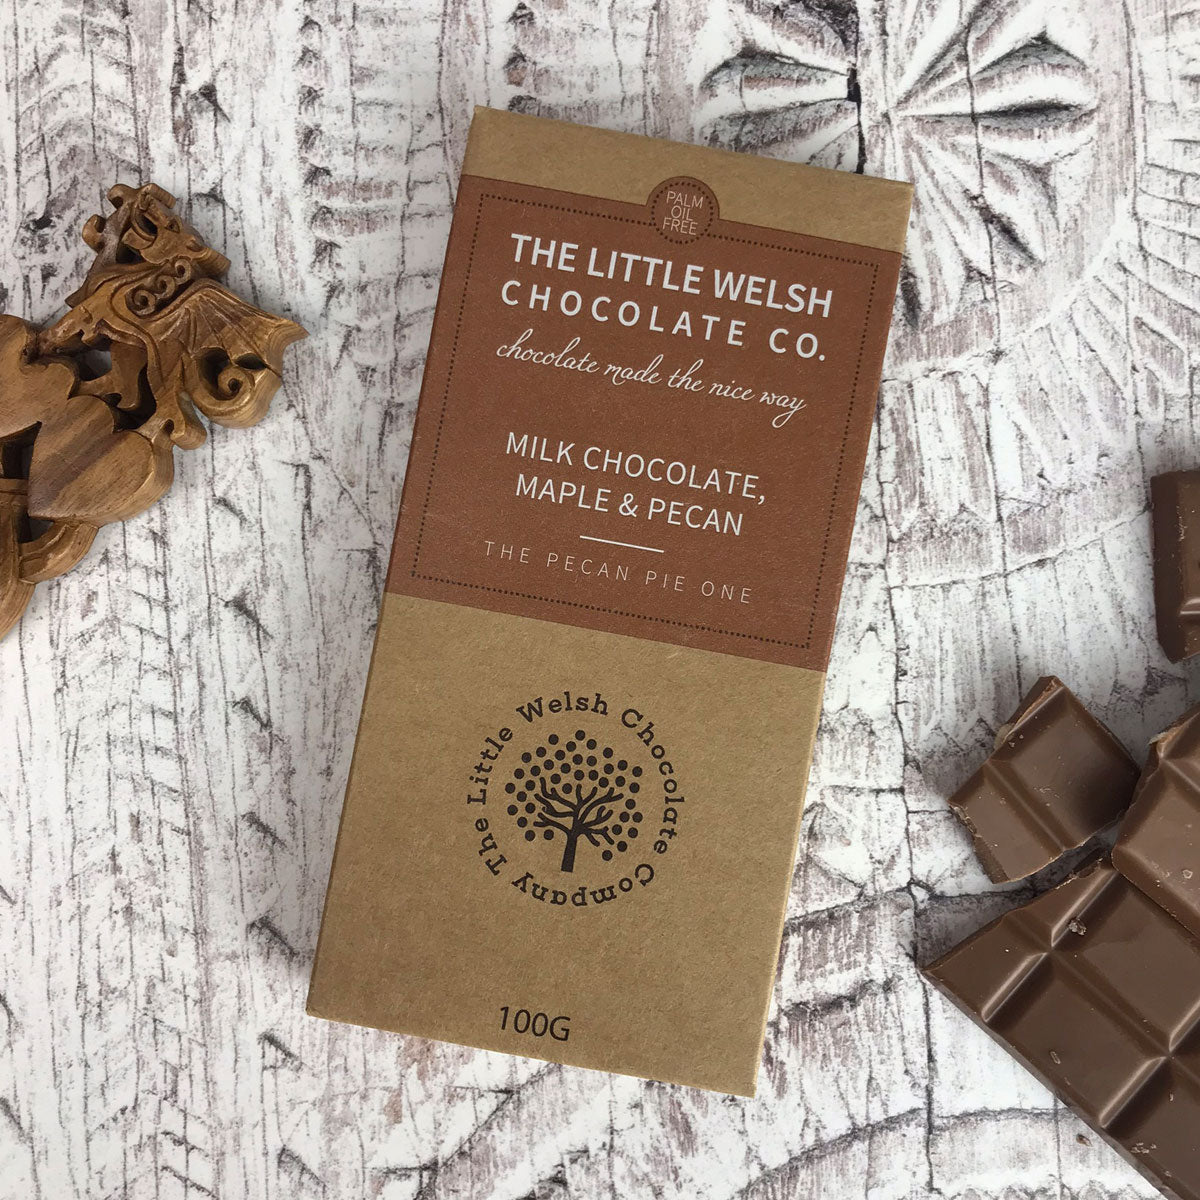 Milk Chocolate, Maple and Pecan Bar by The Little Welsh Chocolate Company